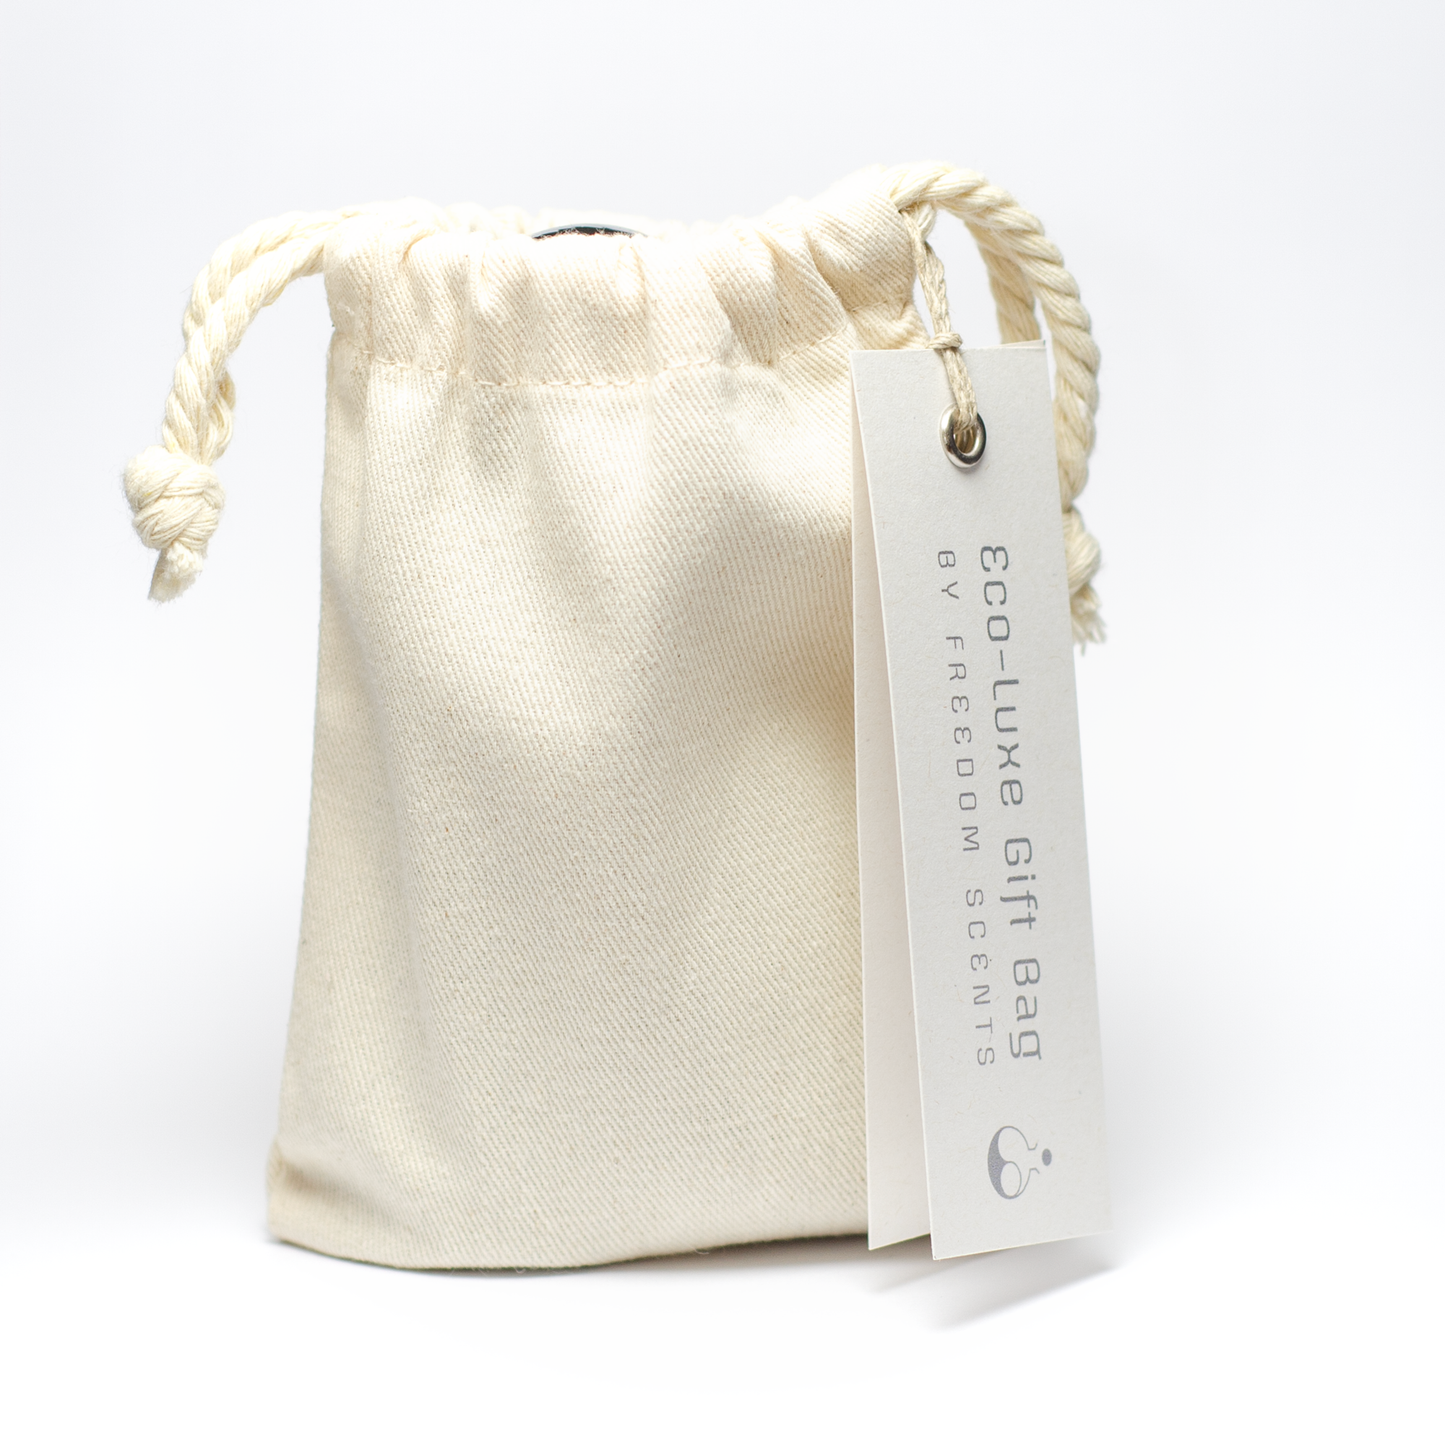 Pictured, a cotton bag with the spray and solid perfume placed inside. A tag coming off the right side that reads ‘eco-luxe gift bag’ by freedom scents